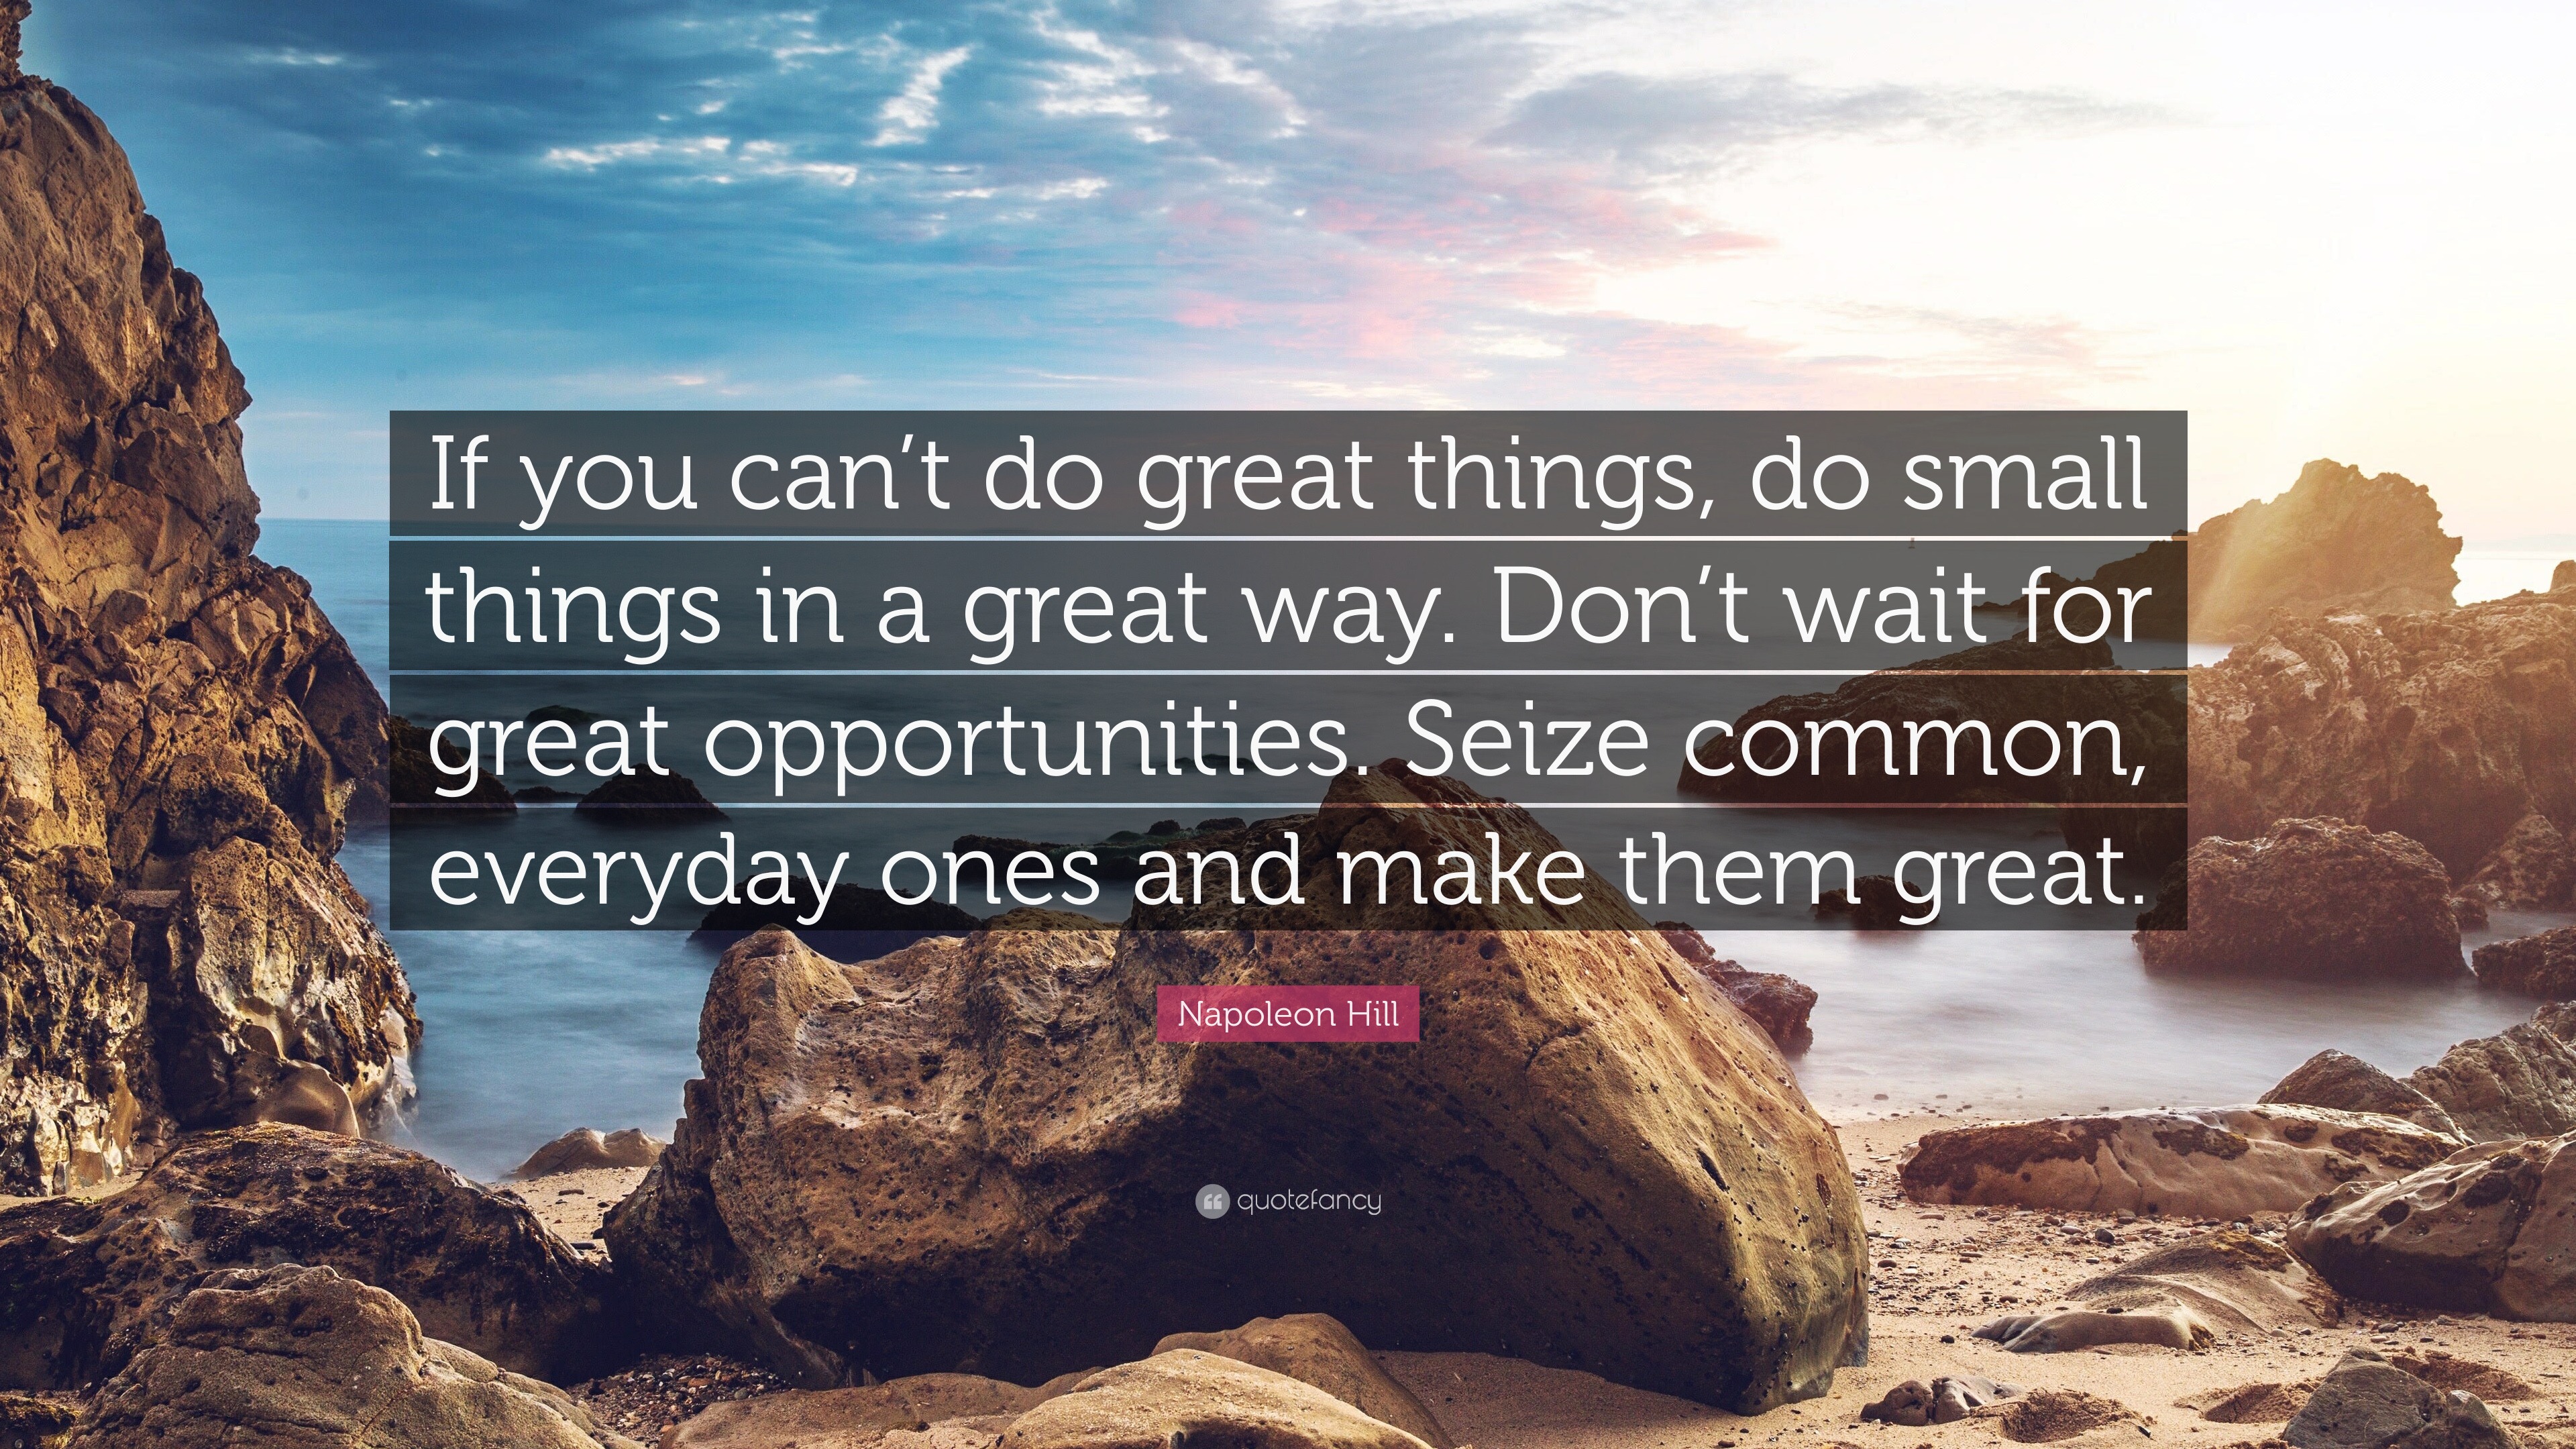 Napoleon Hill Quote: “If you can’t do great things, do small things in ...